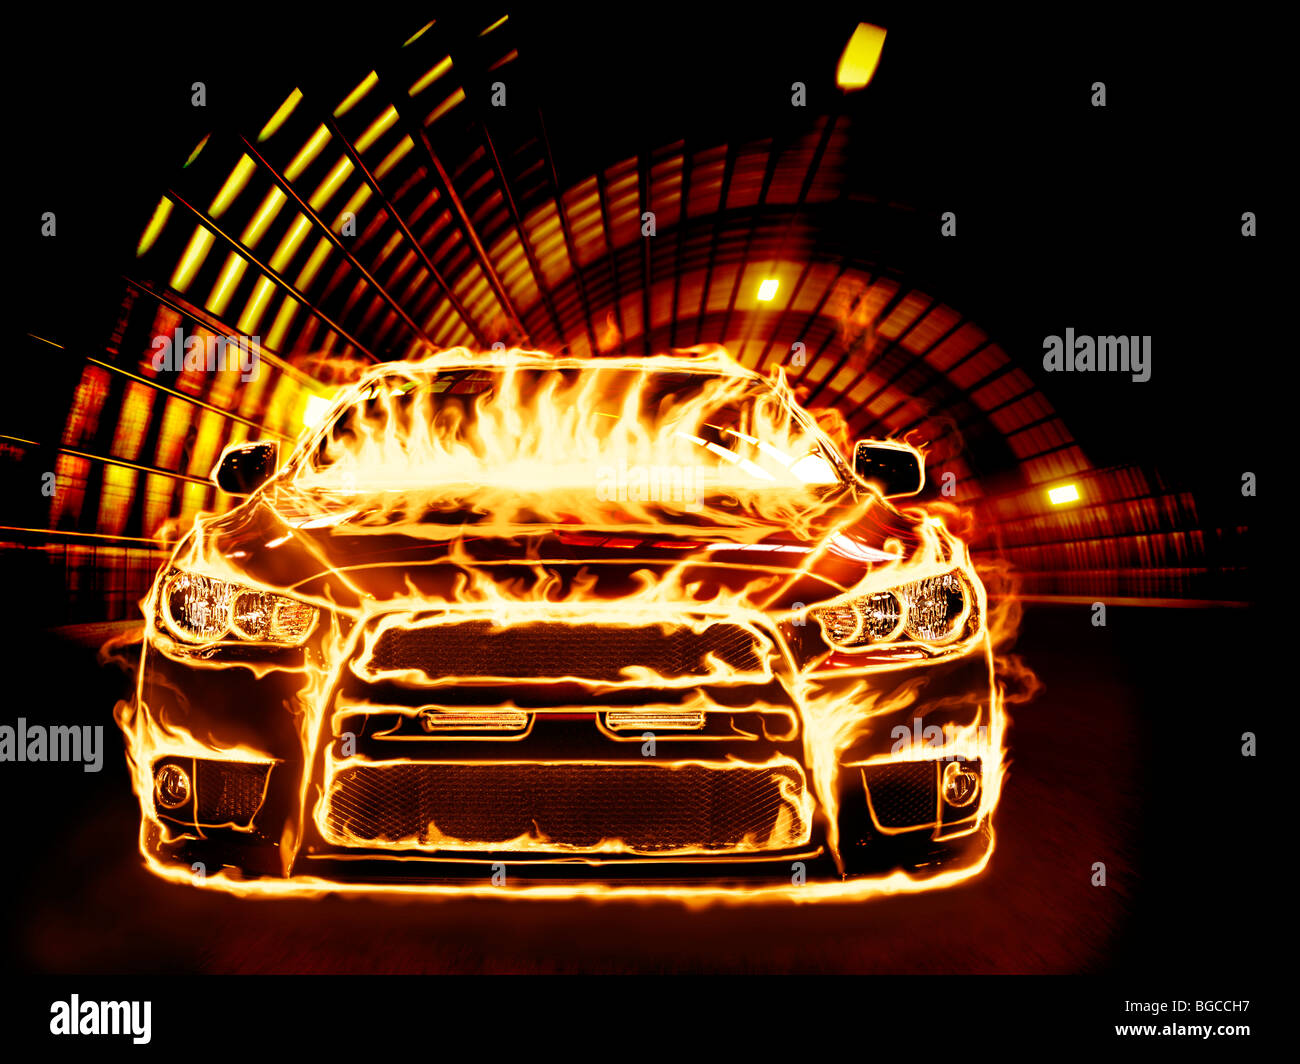 License and prints at MaximImages.com - Covered with flames sports car racing along a tunnel Stock Photo